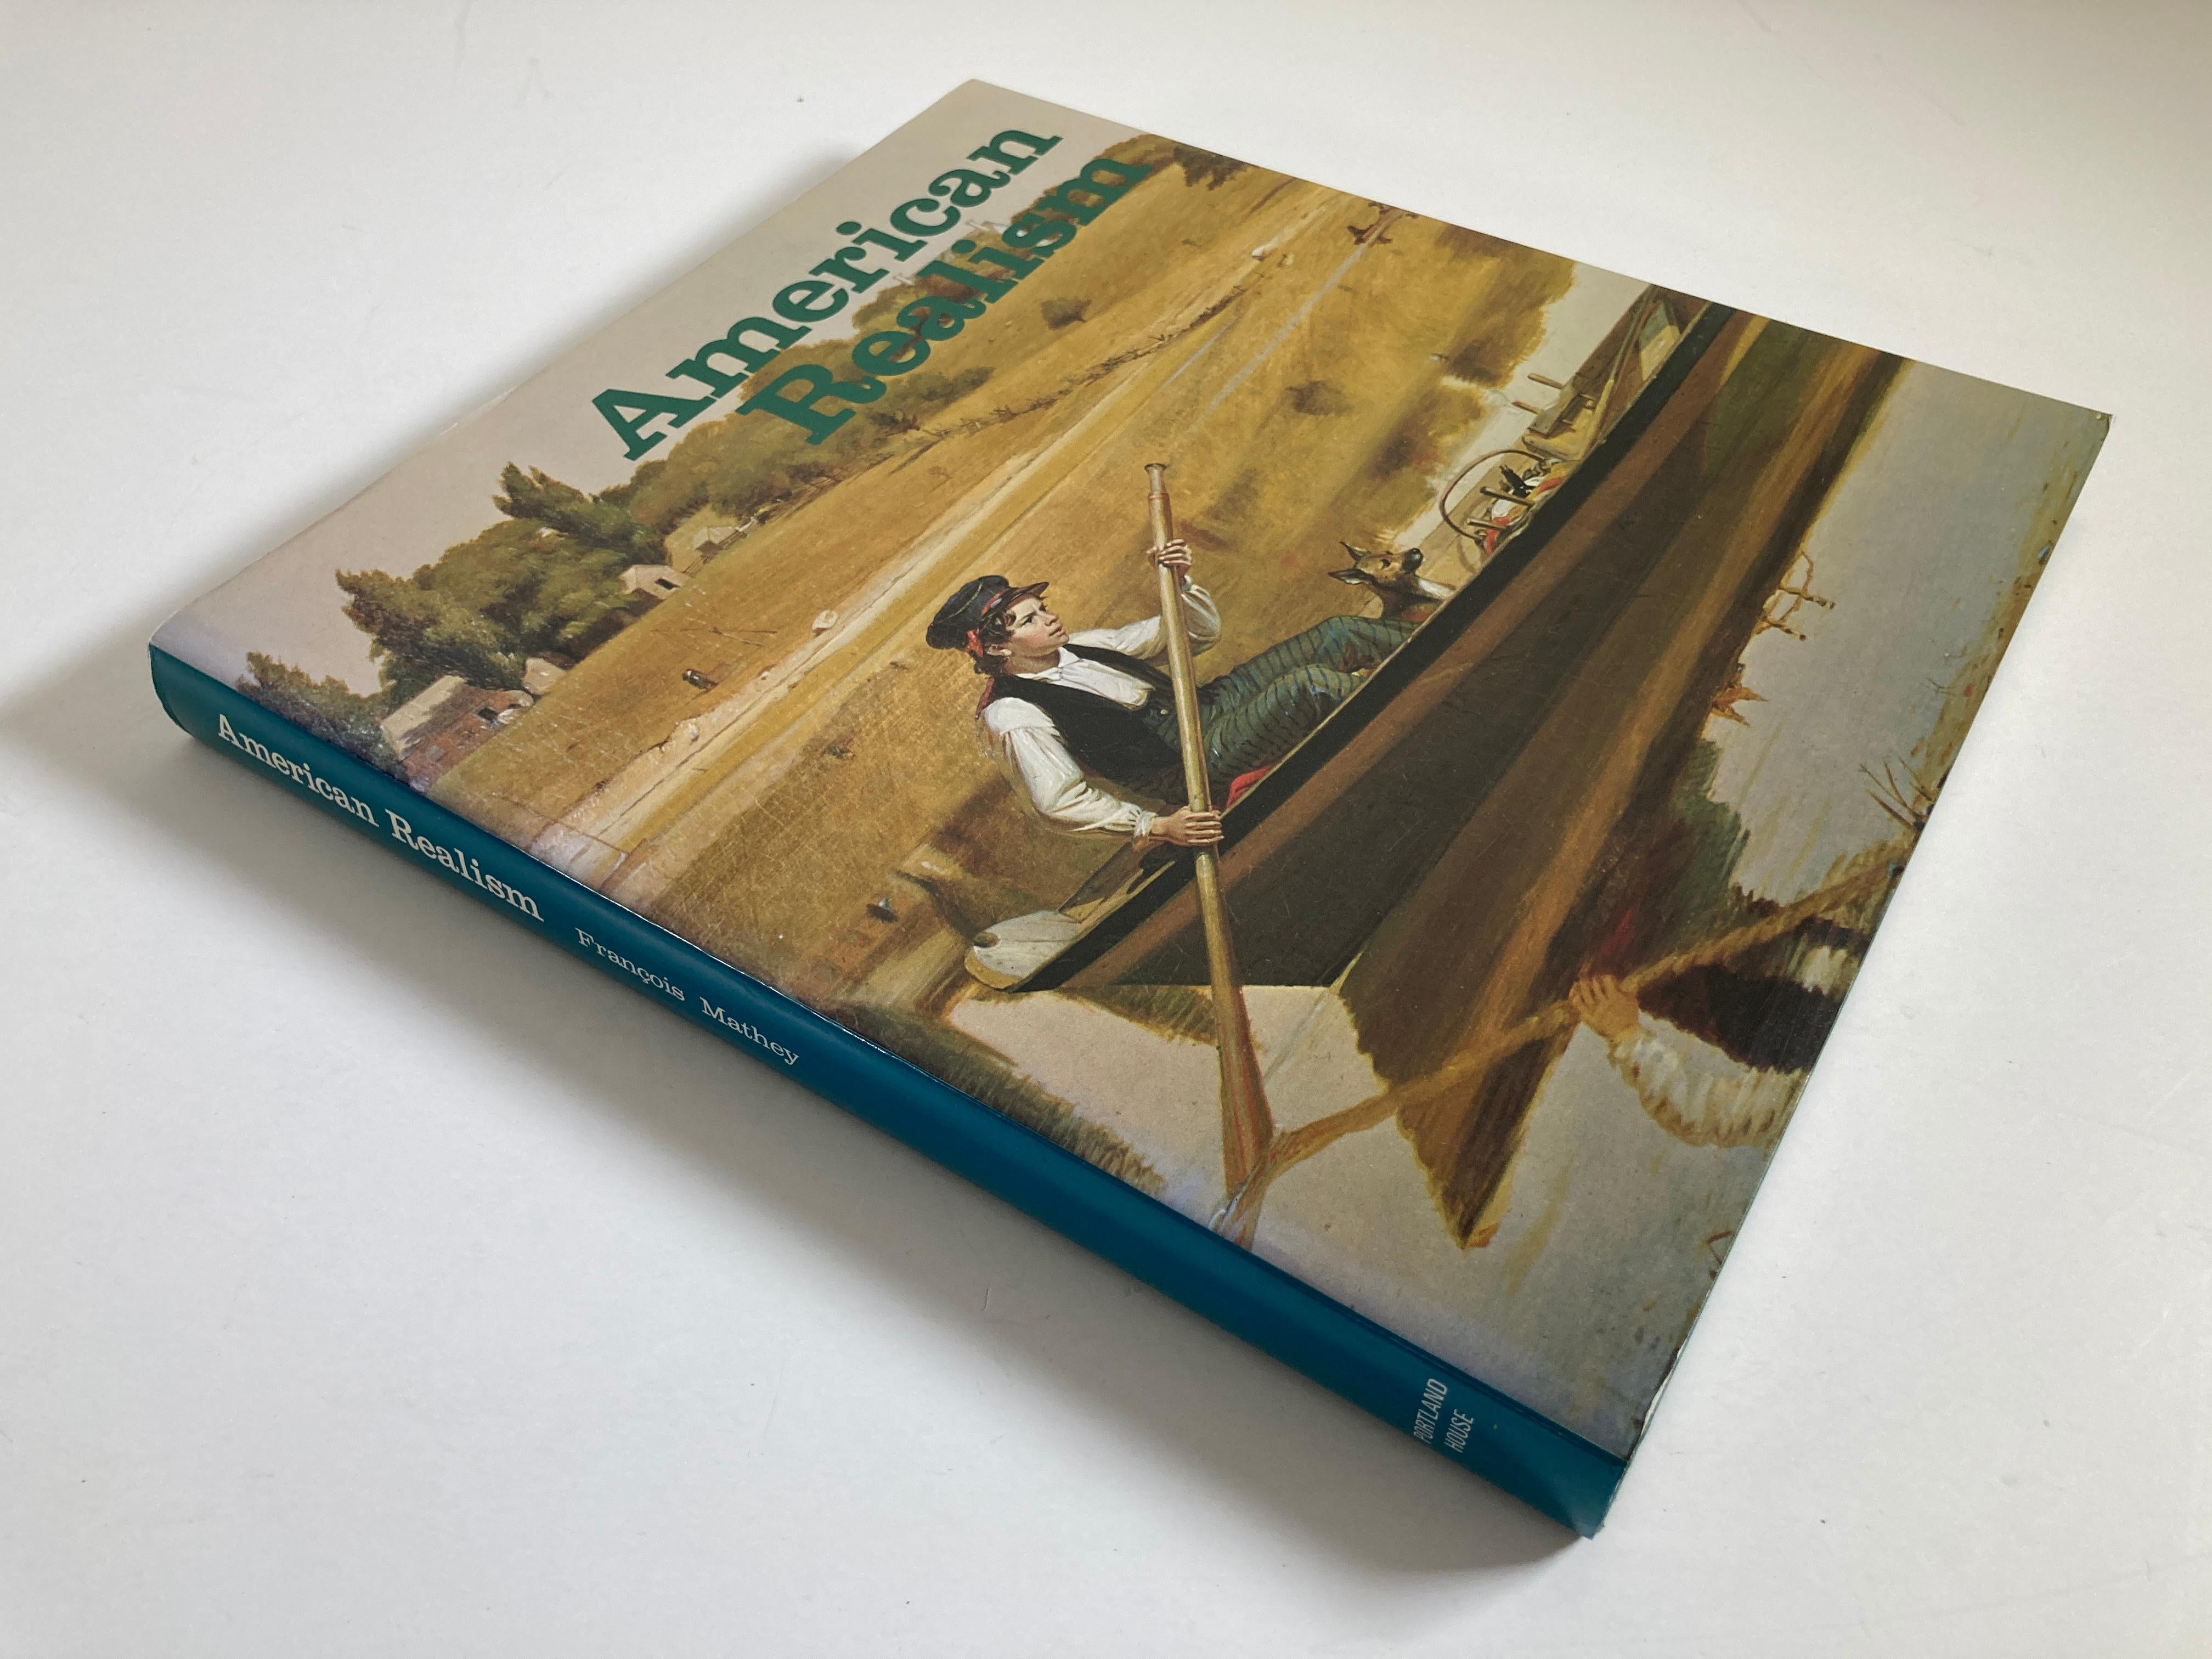 American Realism, a pictorial survey from the early 18th century to the 1970s.
Mathey, François
Published by Portland House, 1987
Title: American Realism: A pictorial survey from...
Publisher: Portland House
Publication date: 1987
Binding: